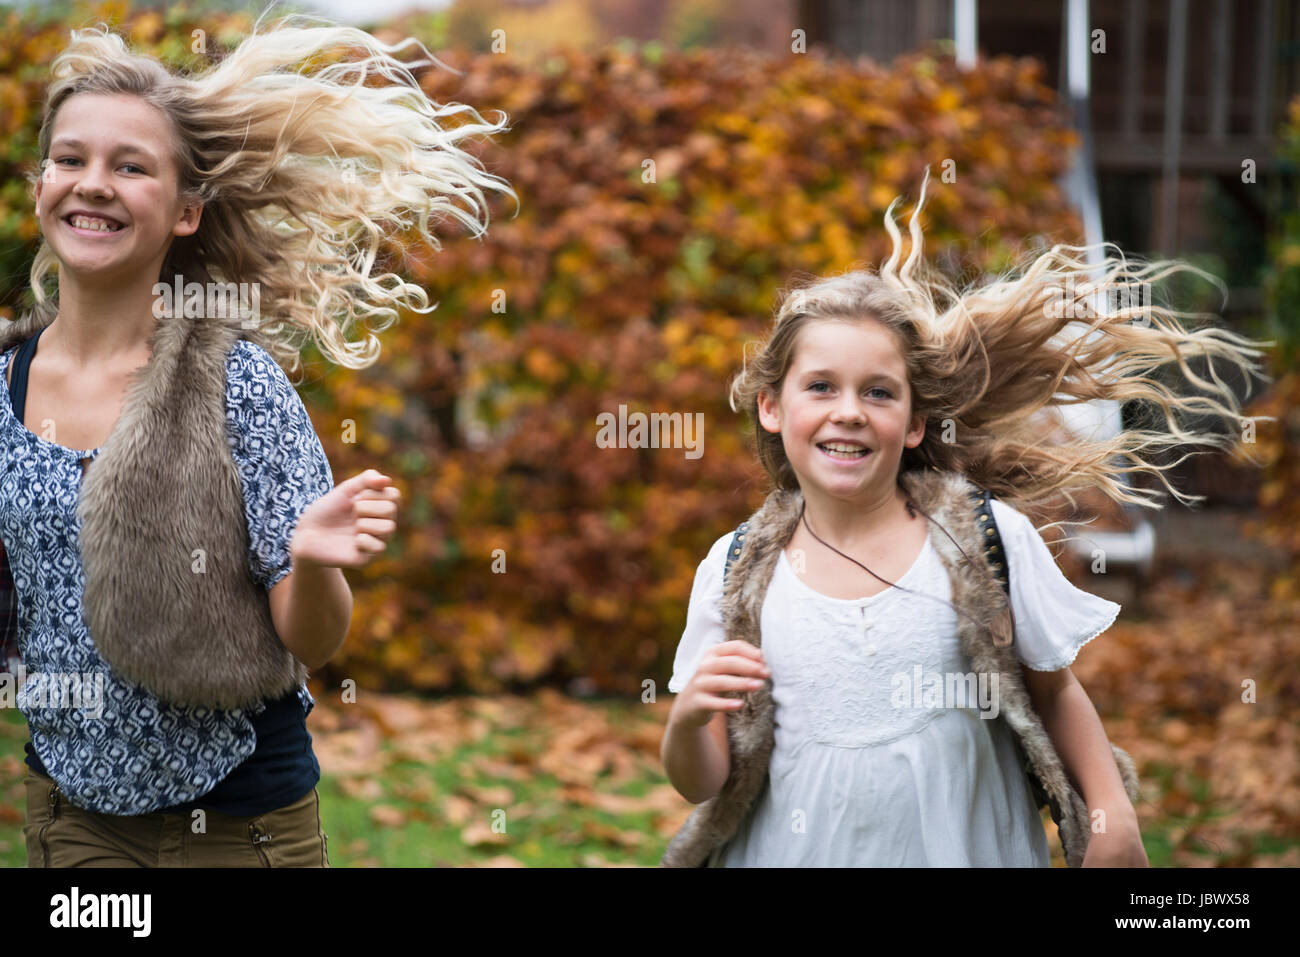 Two sisters with long blond hair running in autumn garden Stock Photo